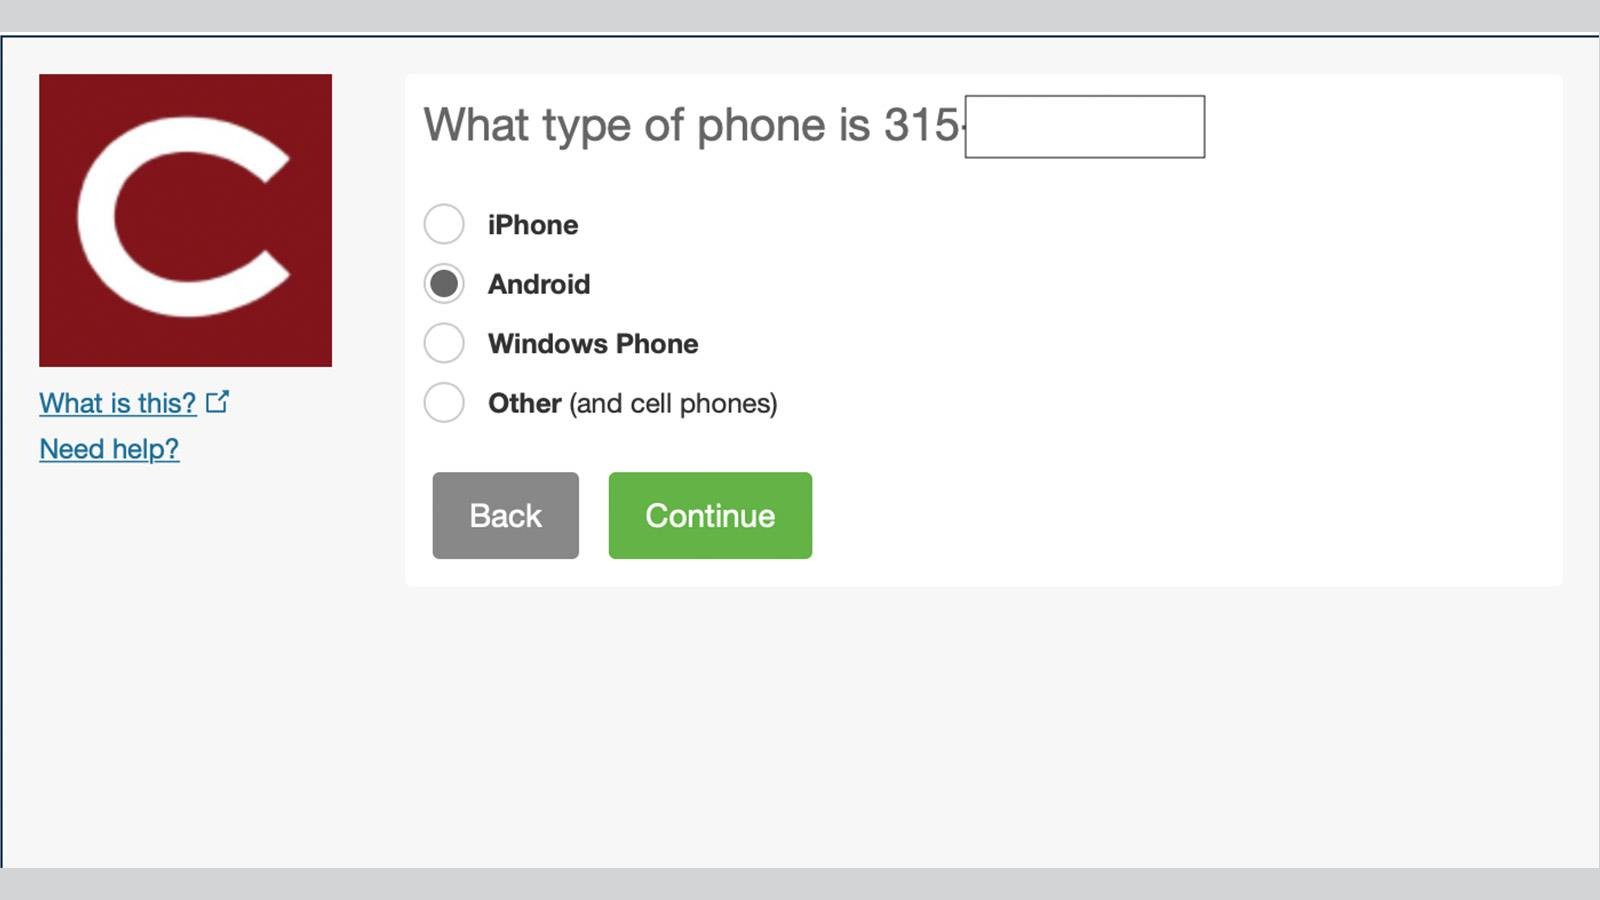 What type of phone is it? Android selected in radio buttons